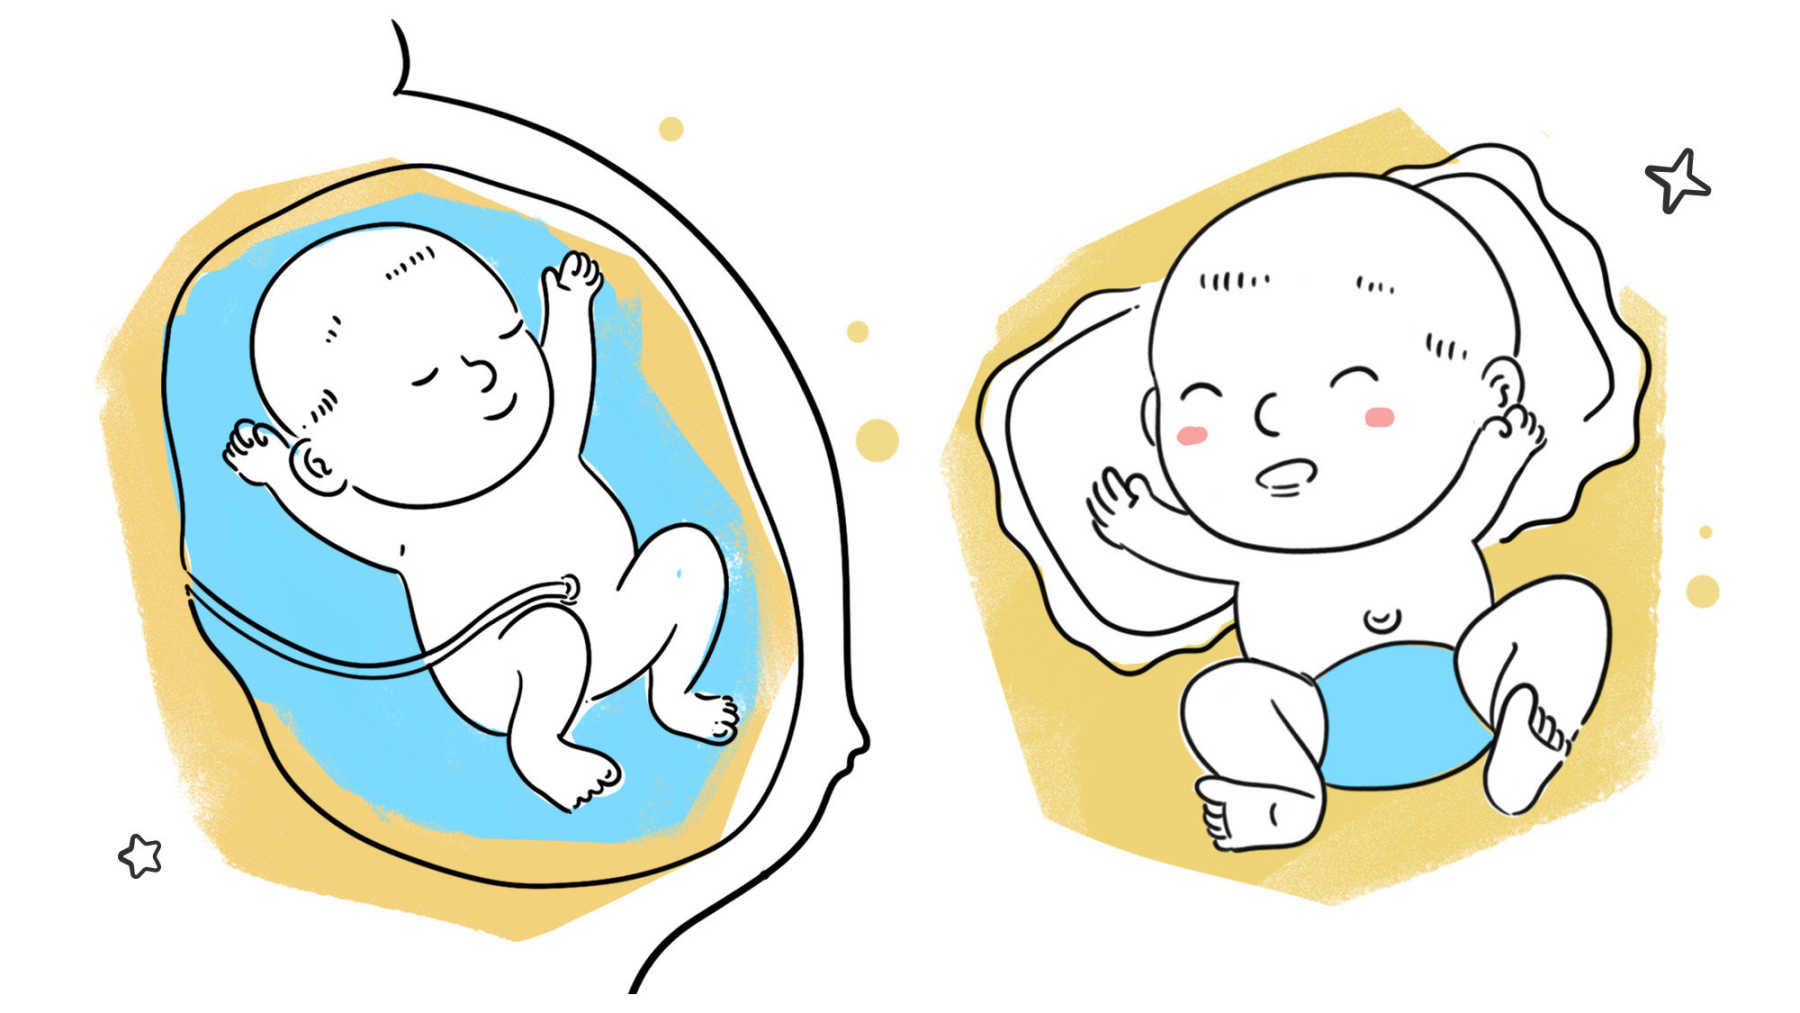 How to care for your newborn's umbilical cord stump